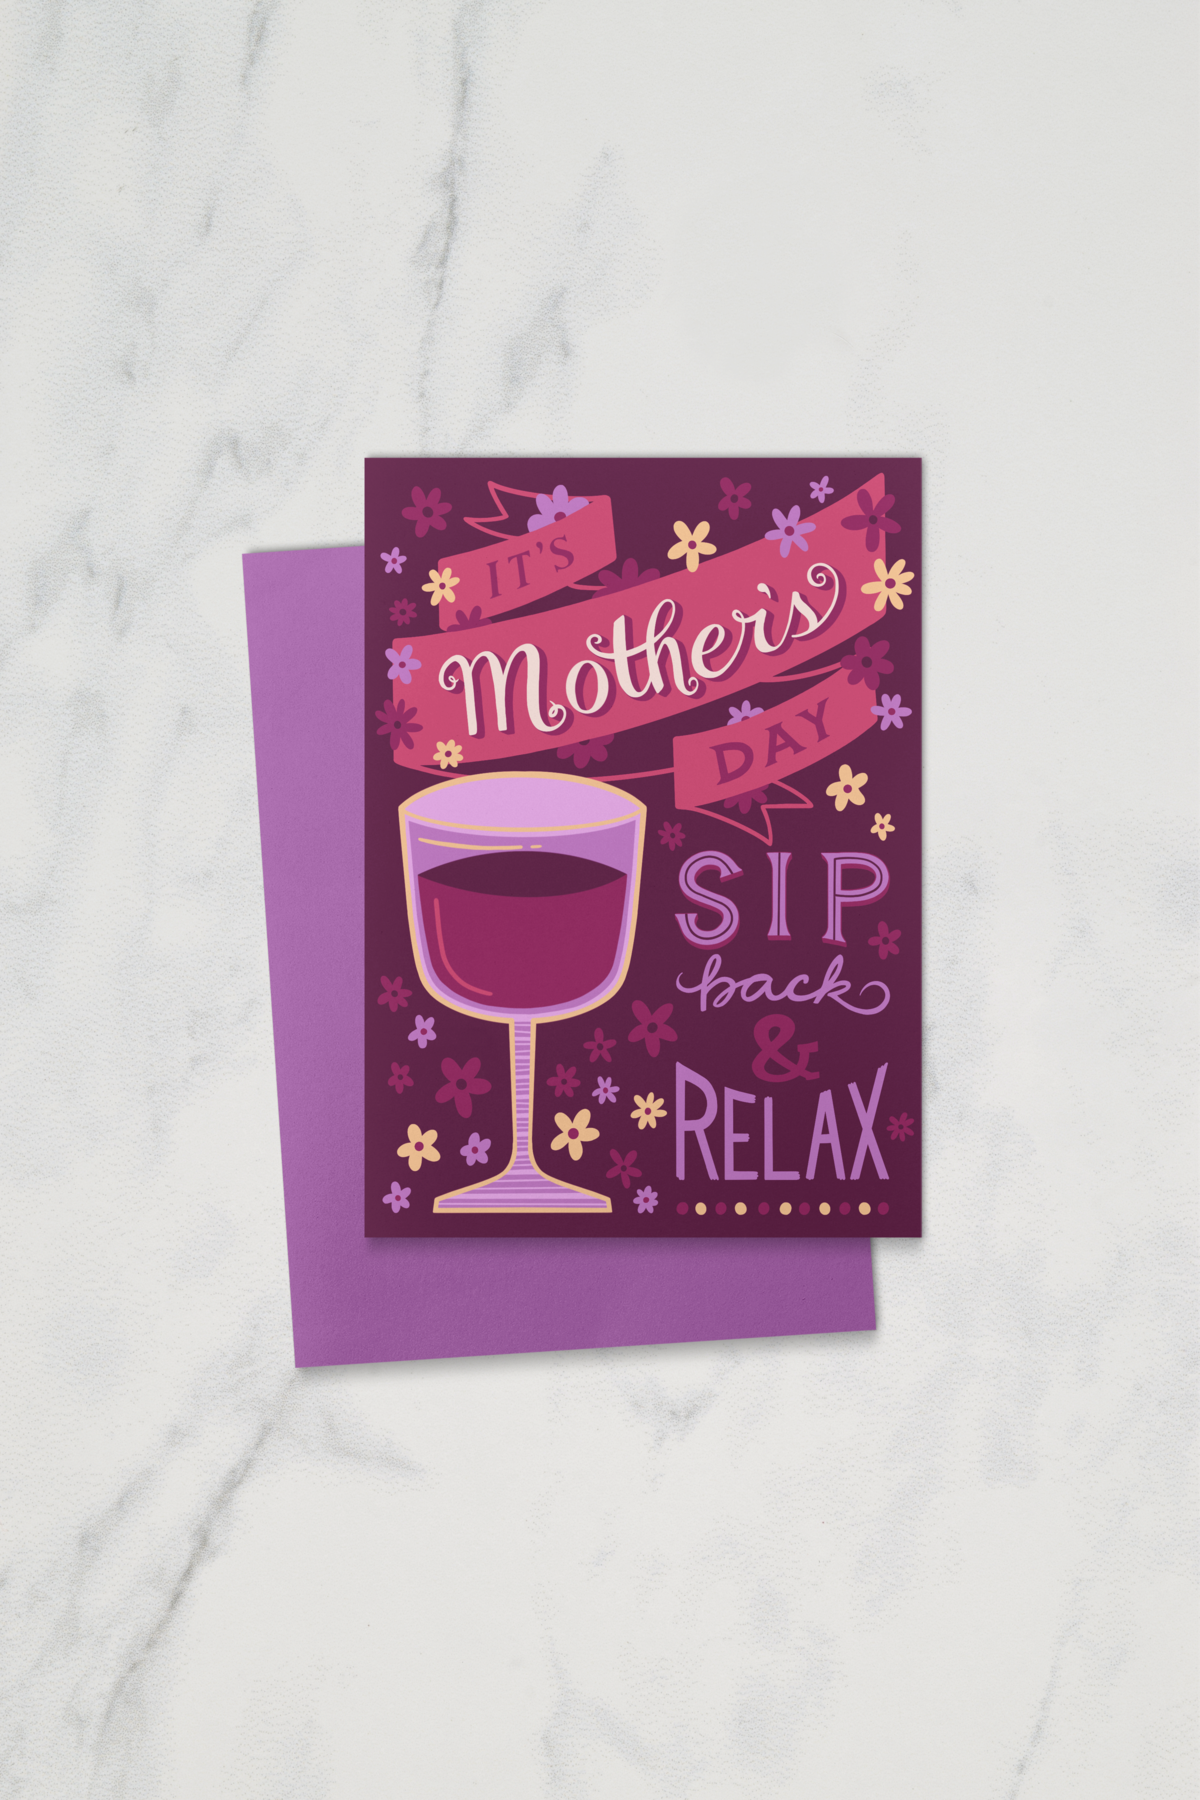 sip-back-and-relax-mockup